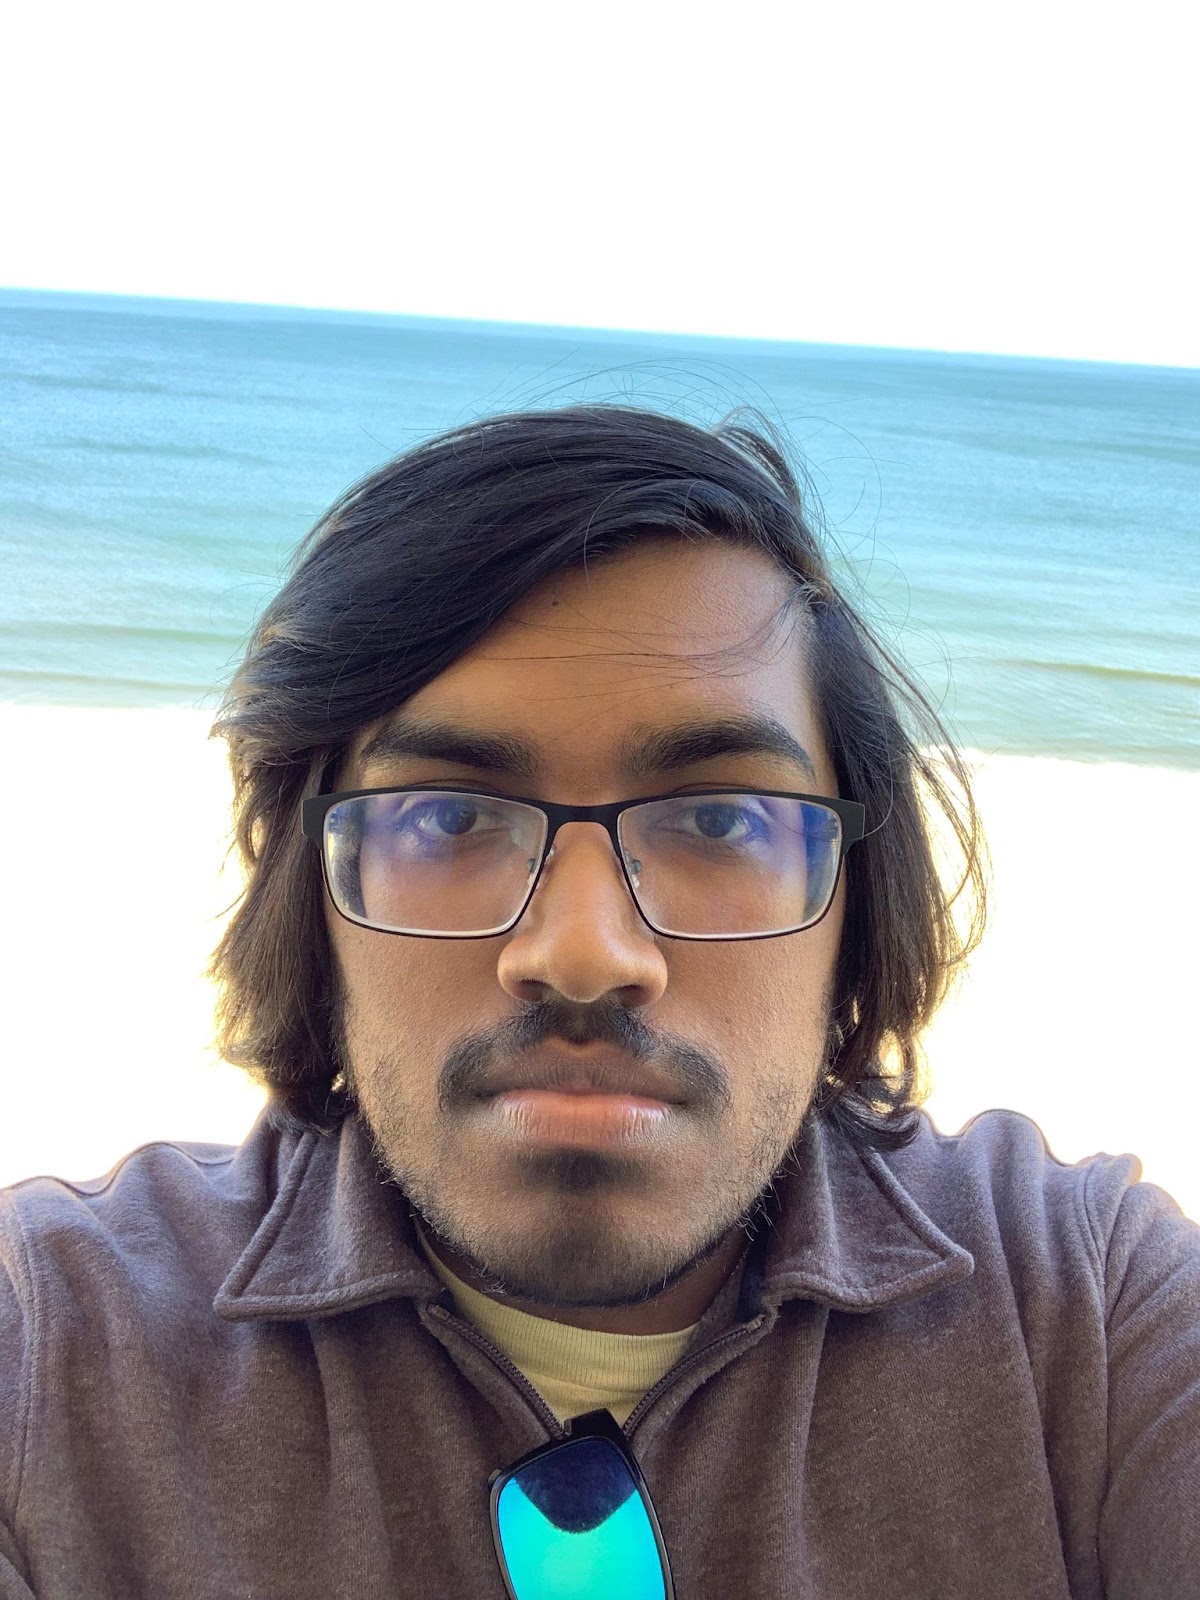 A man with dark black hair wearing glasses standing in front of the ocean